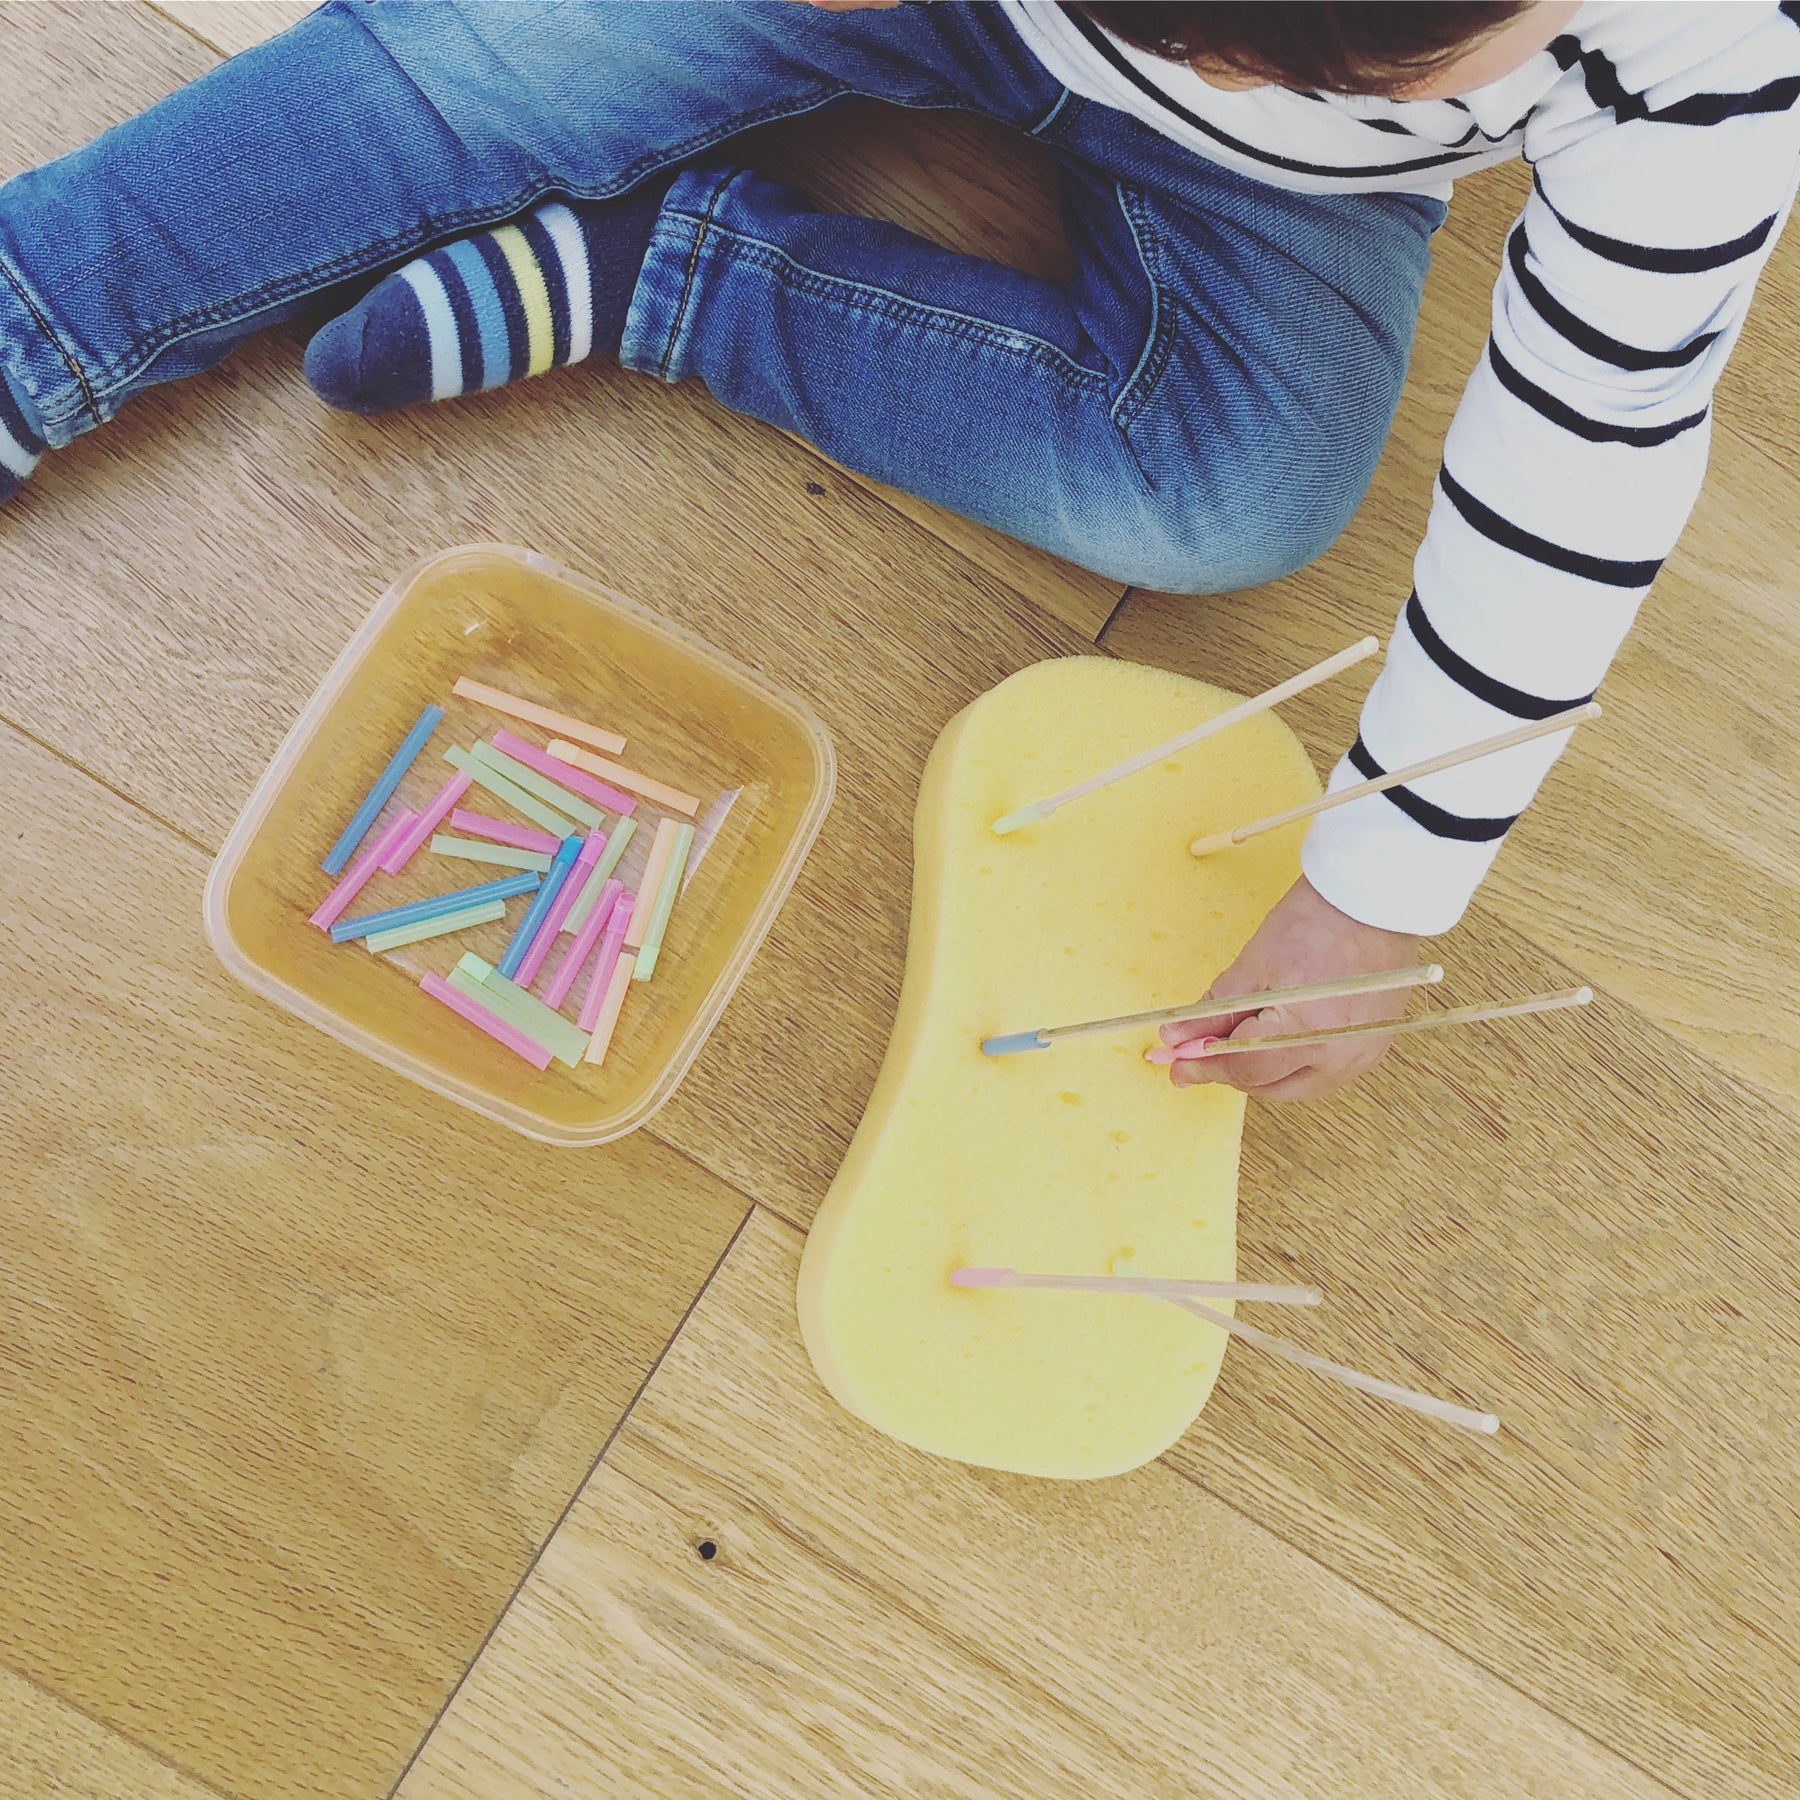 Our mini maker using a sponge with sticks placed in at 90 degrees to put straws on to, developing spatial awareness and fine motor skills